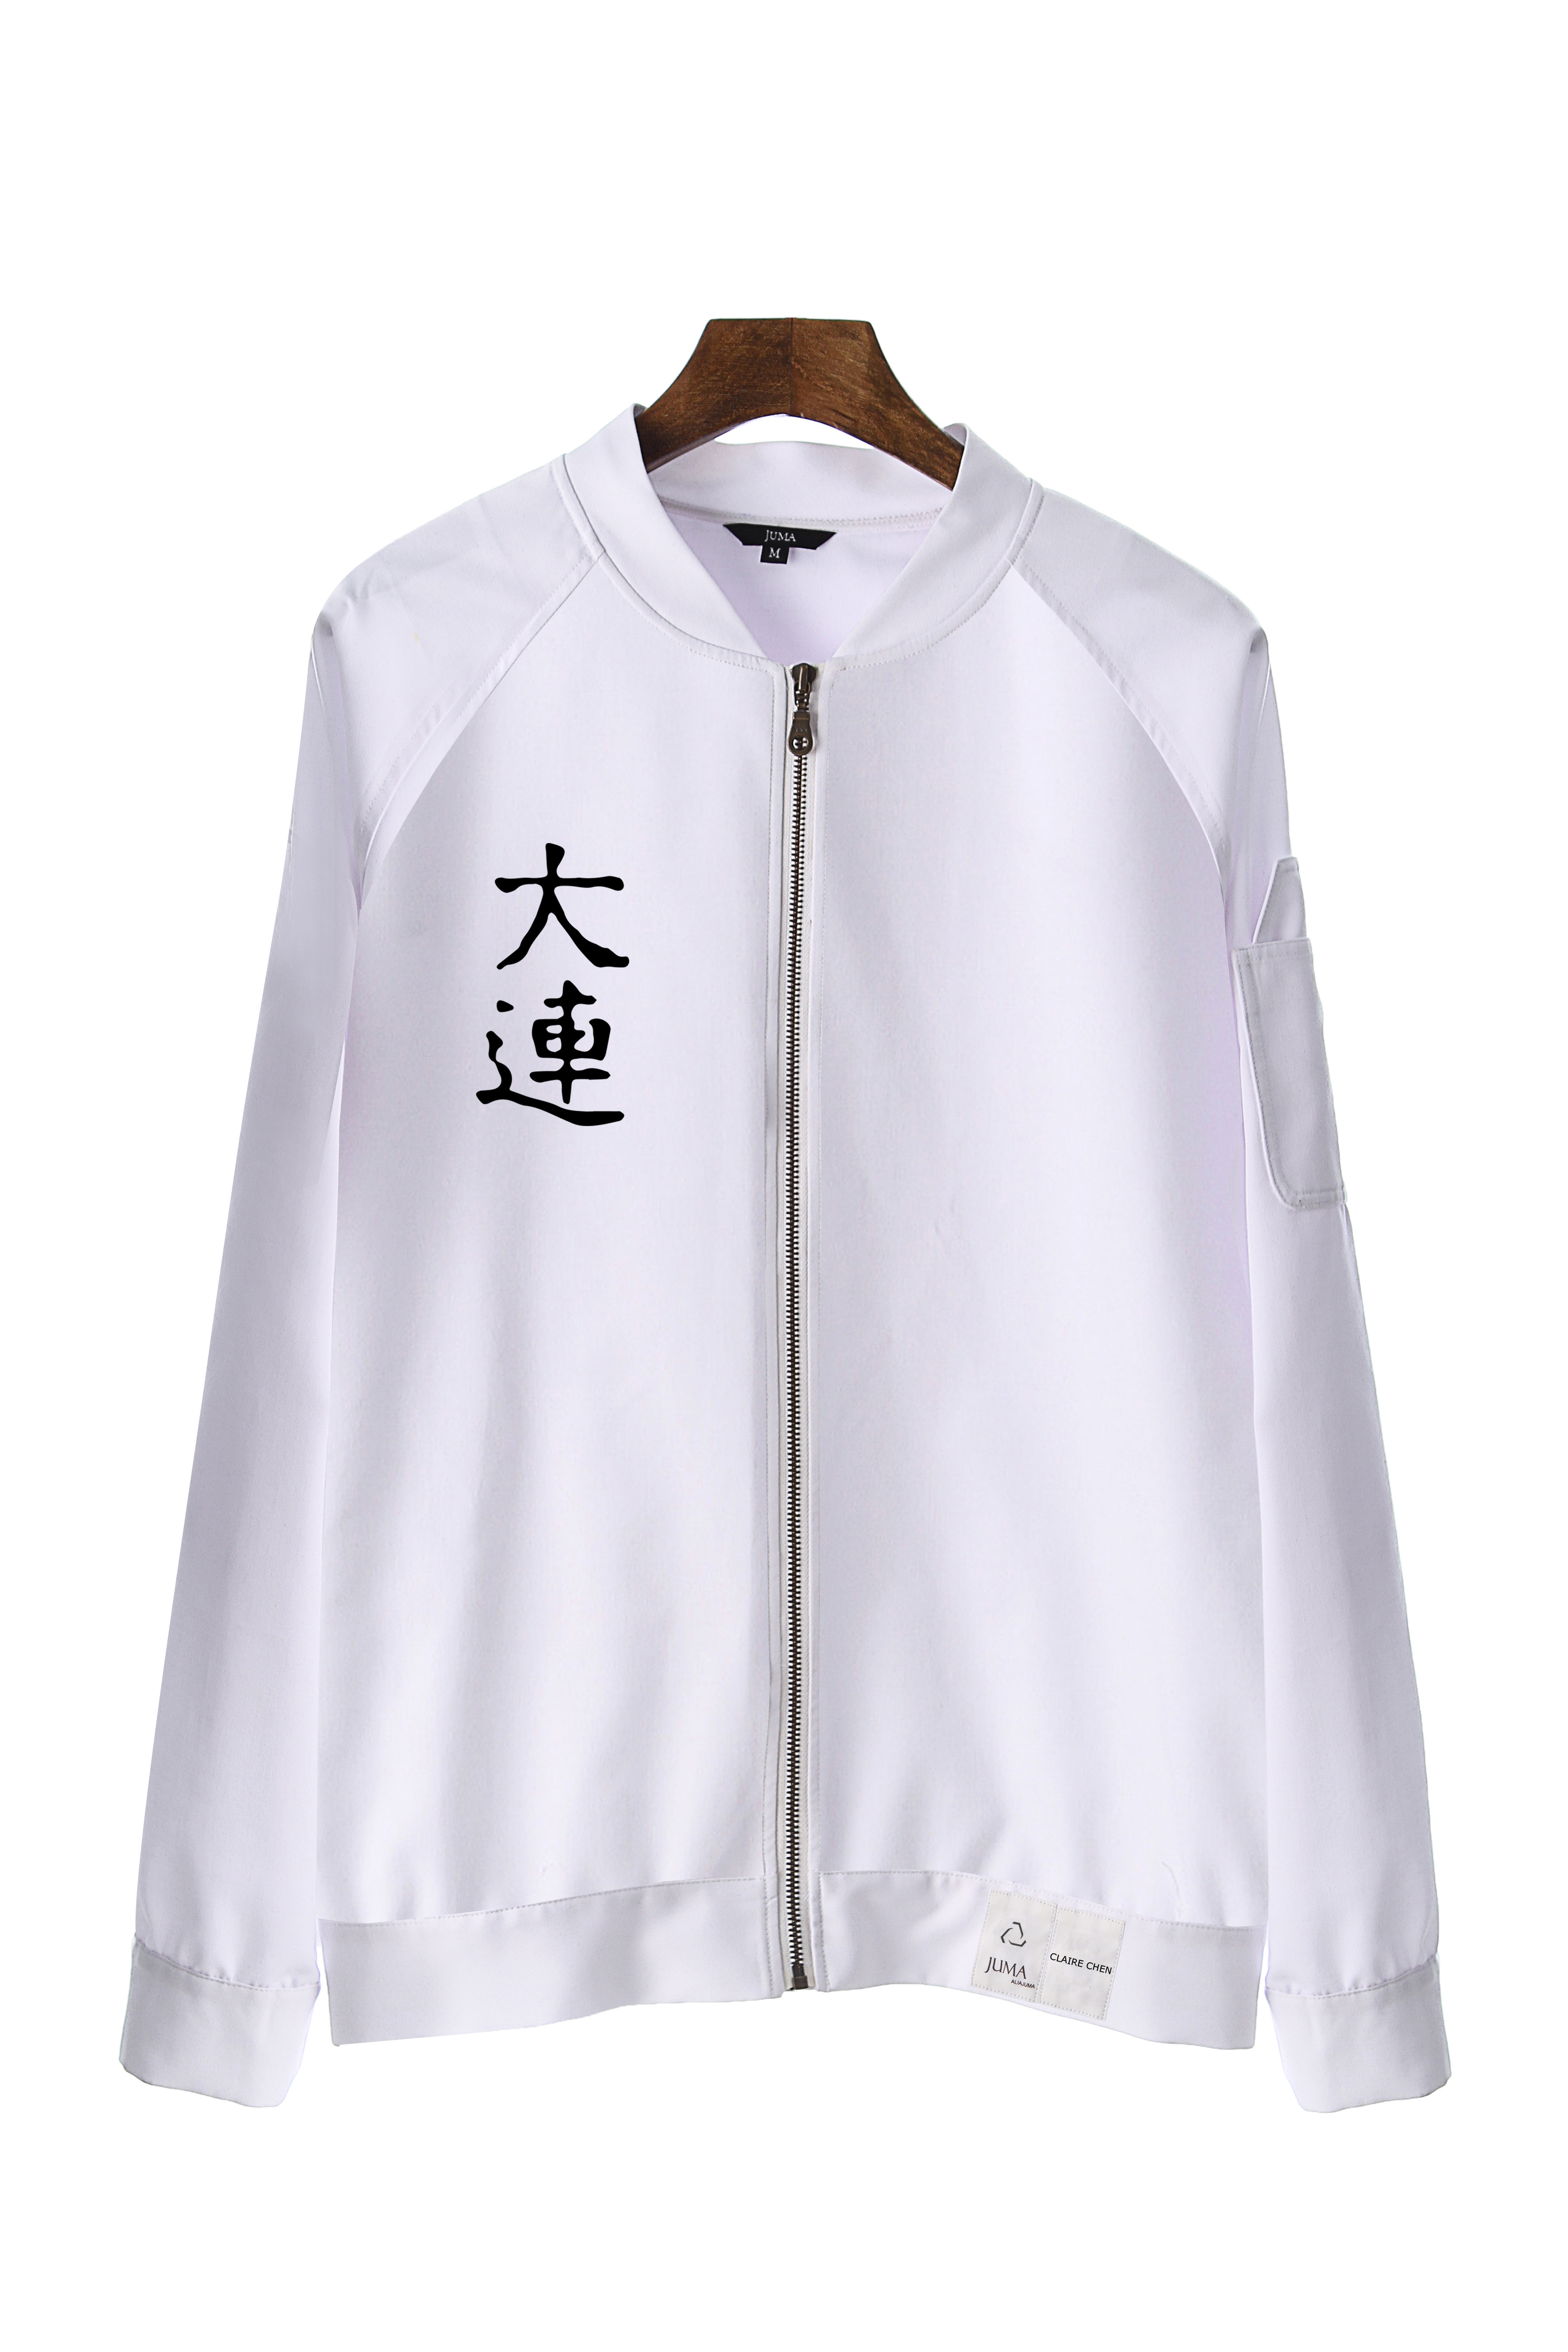 Claire Chen 棒球服夹克-8个回收水瓶-白色｜Claire Chen Bomber Jacket - 8 Recycled Water Bottles - White